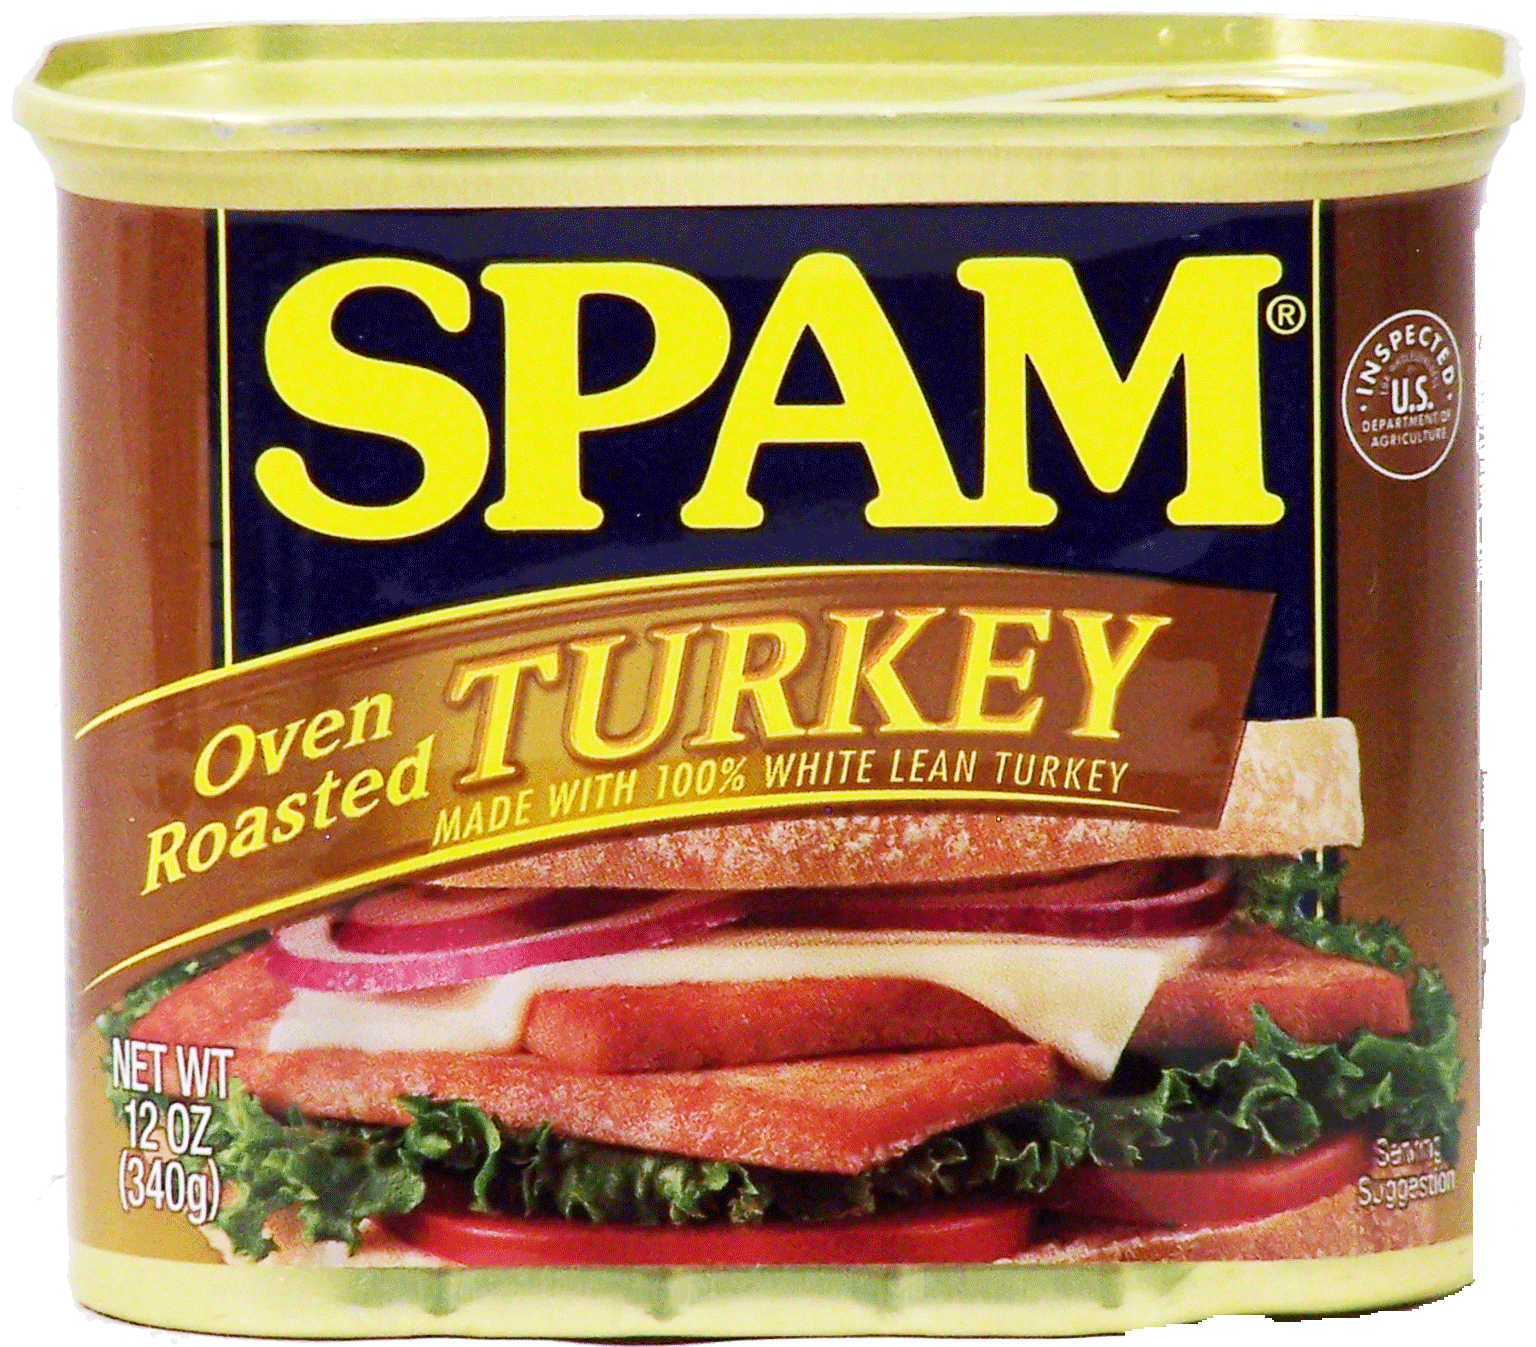 Spam Canned Meat Turkey Oven Roasted Full-Size Picture